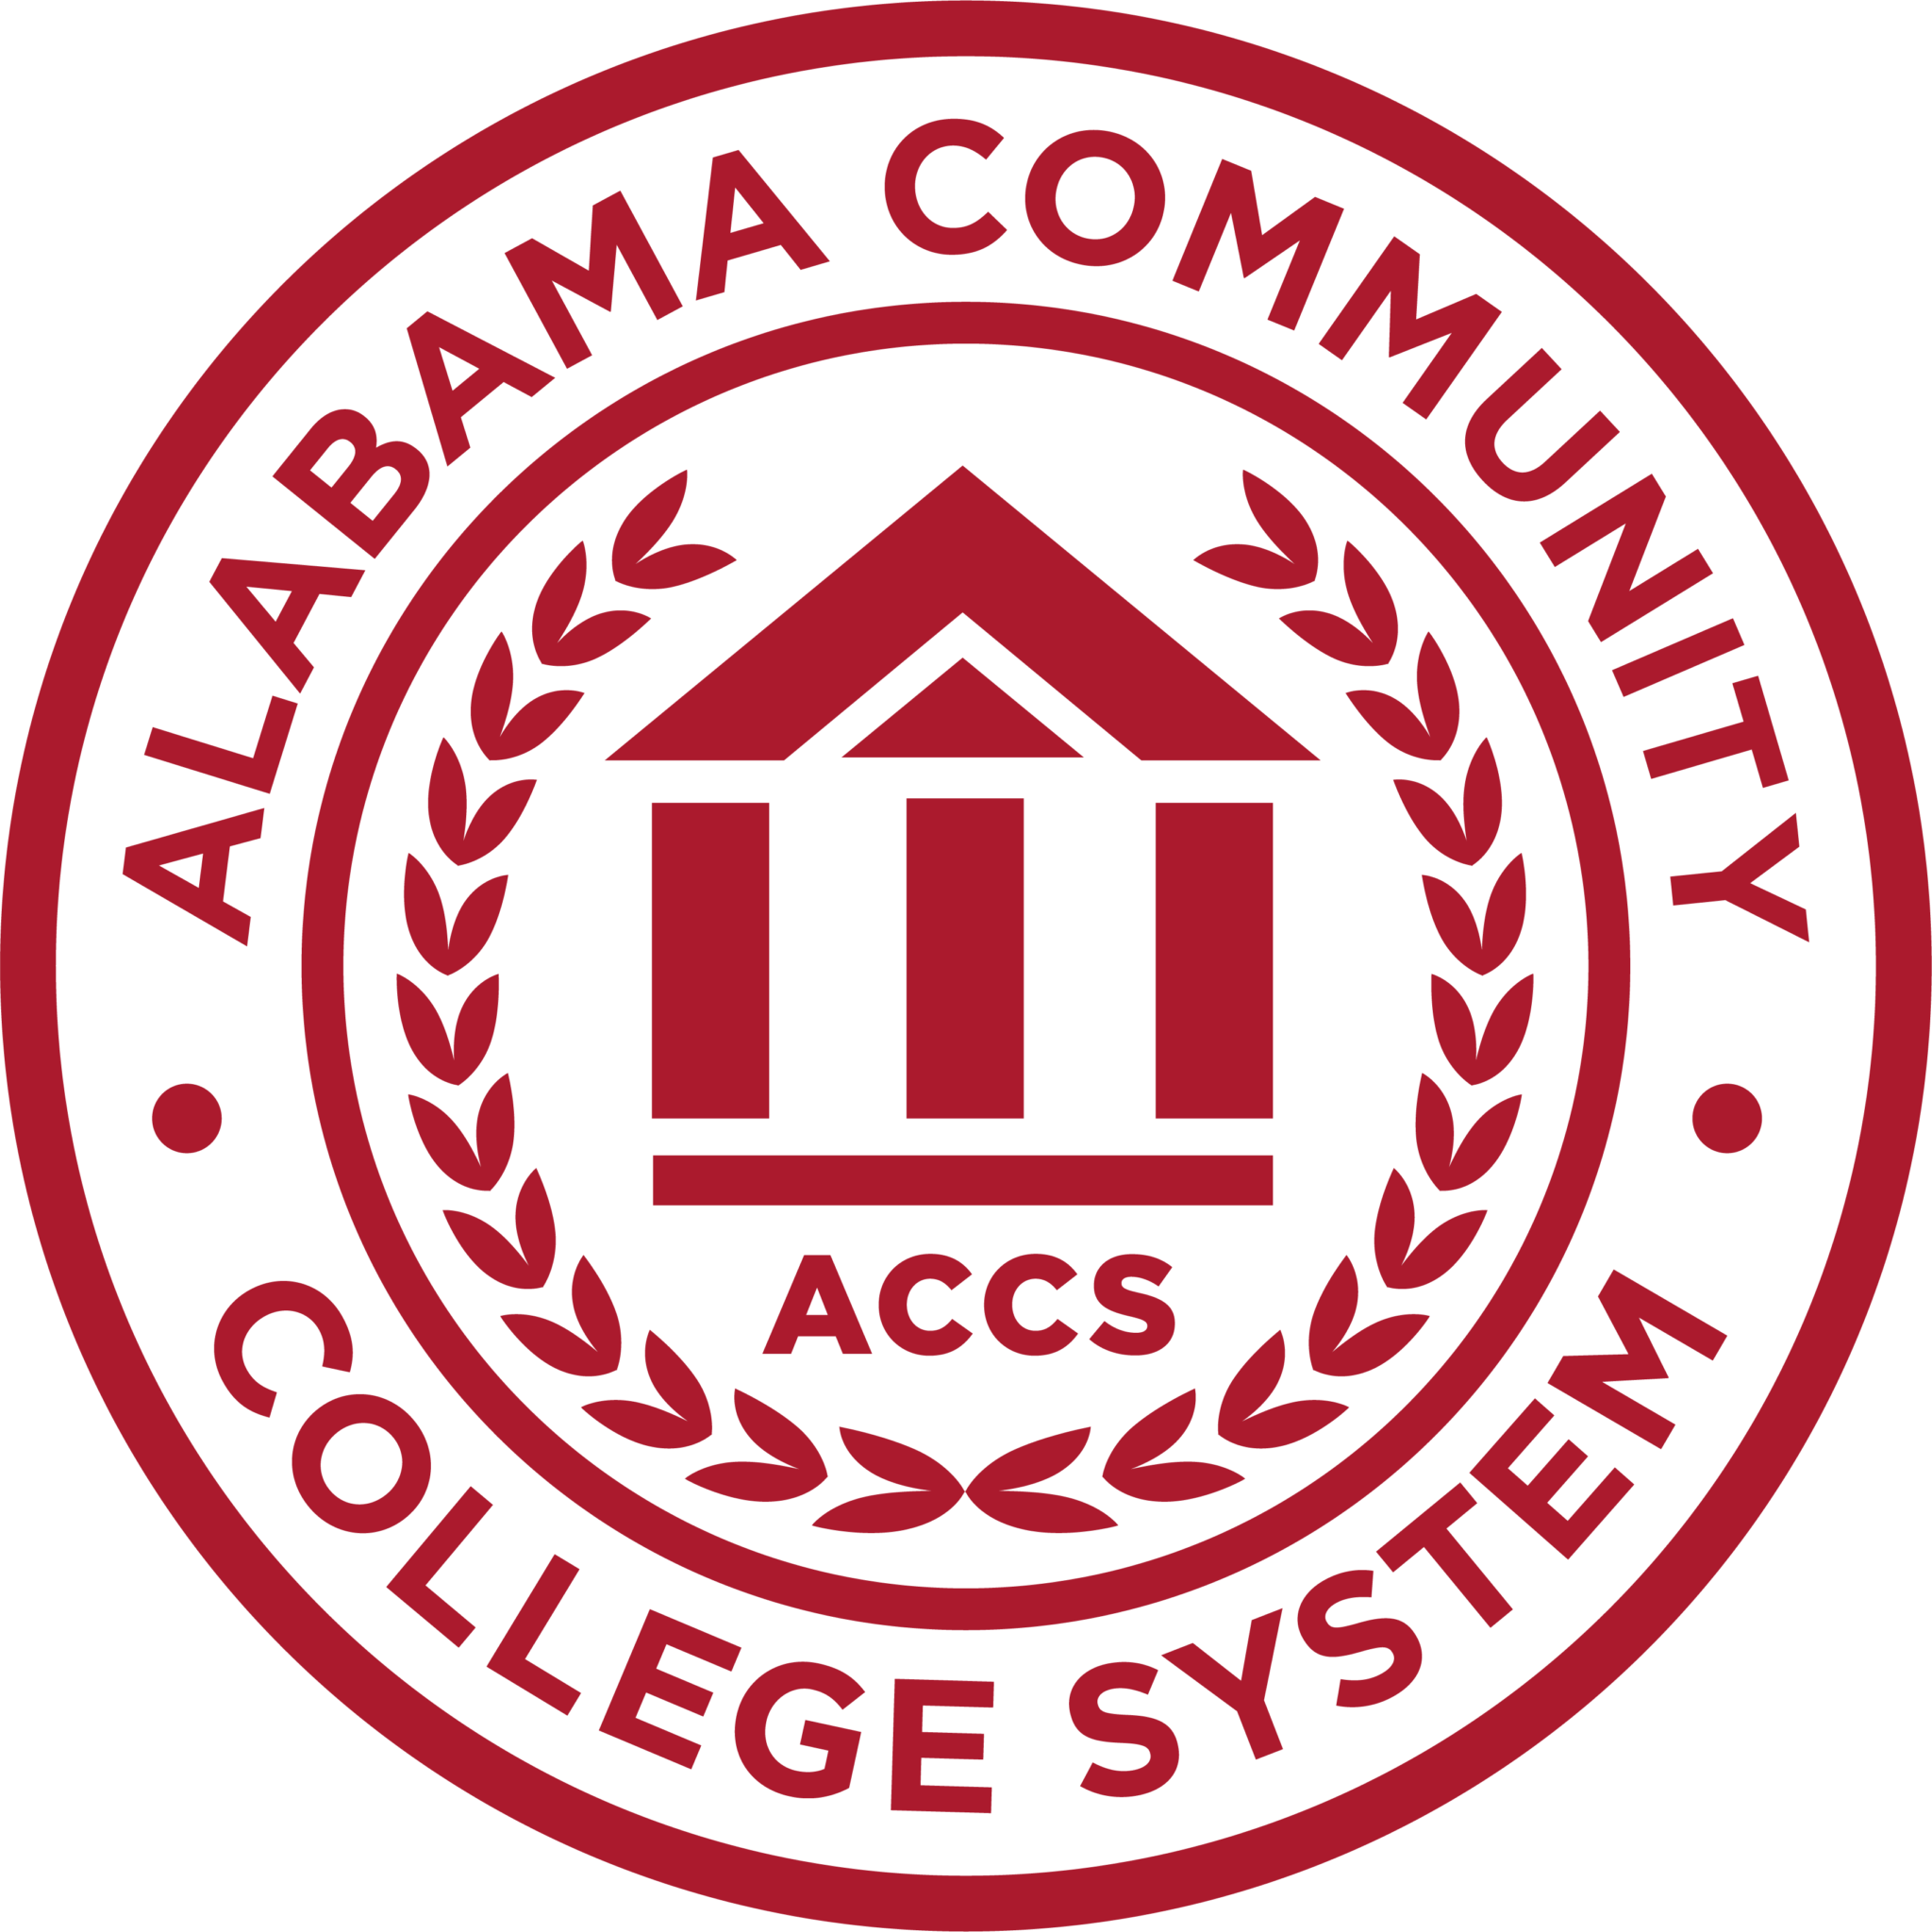 ALABAMA COMMUNITY COLLEGE SYSTEM TO TEMPORARILY DISCONTINUE ON-CAMPUS INSTRUCTION MARCH 17 – APRIL 3